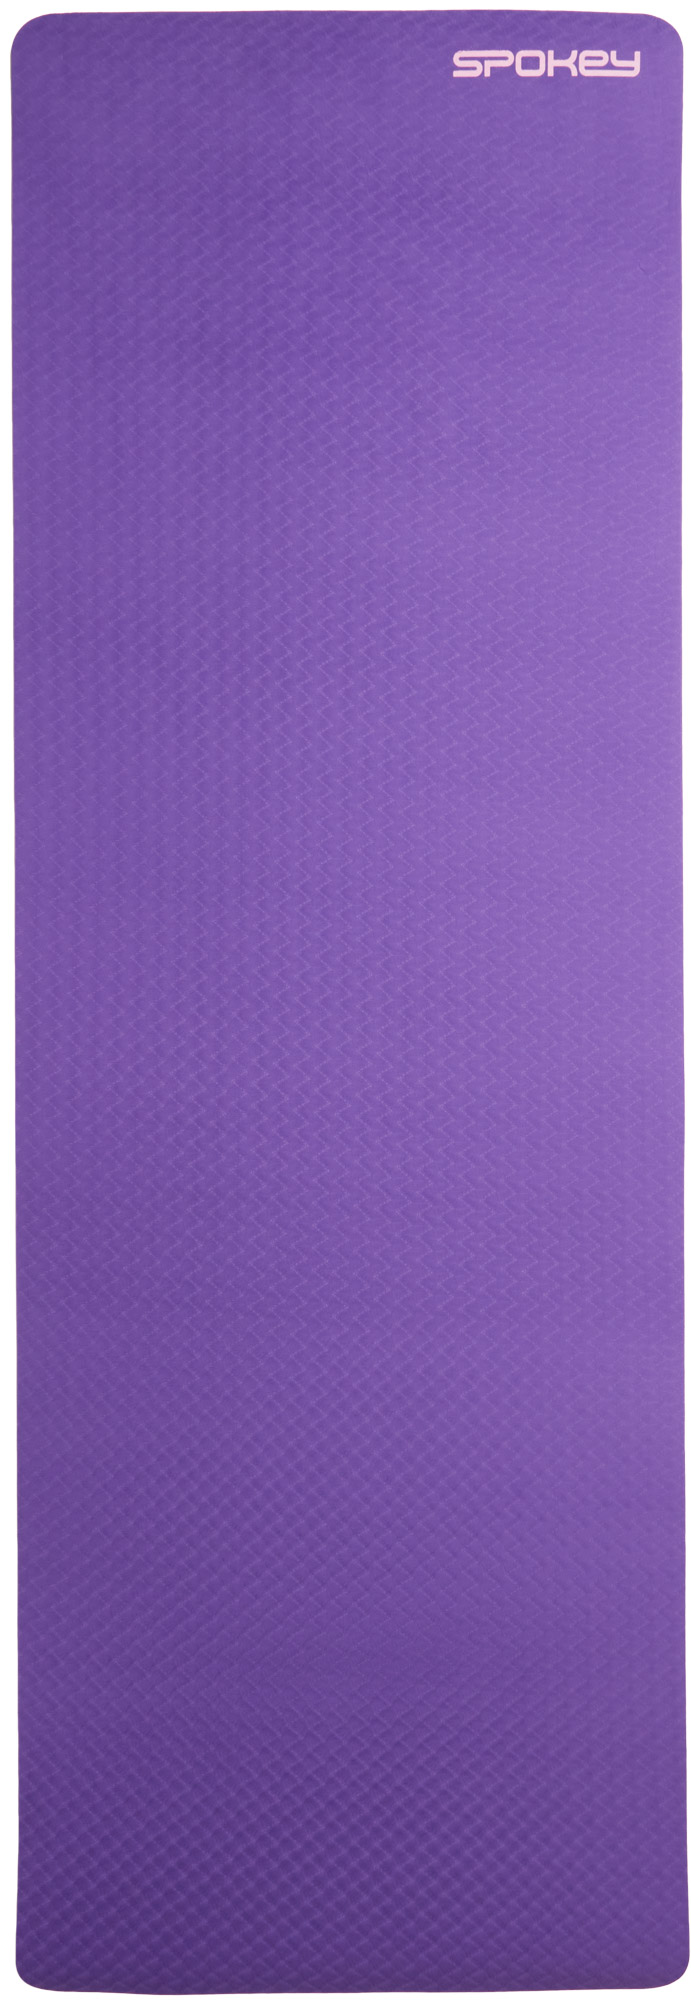 Double-sided yoga mat